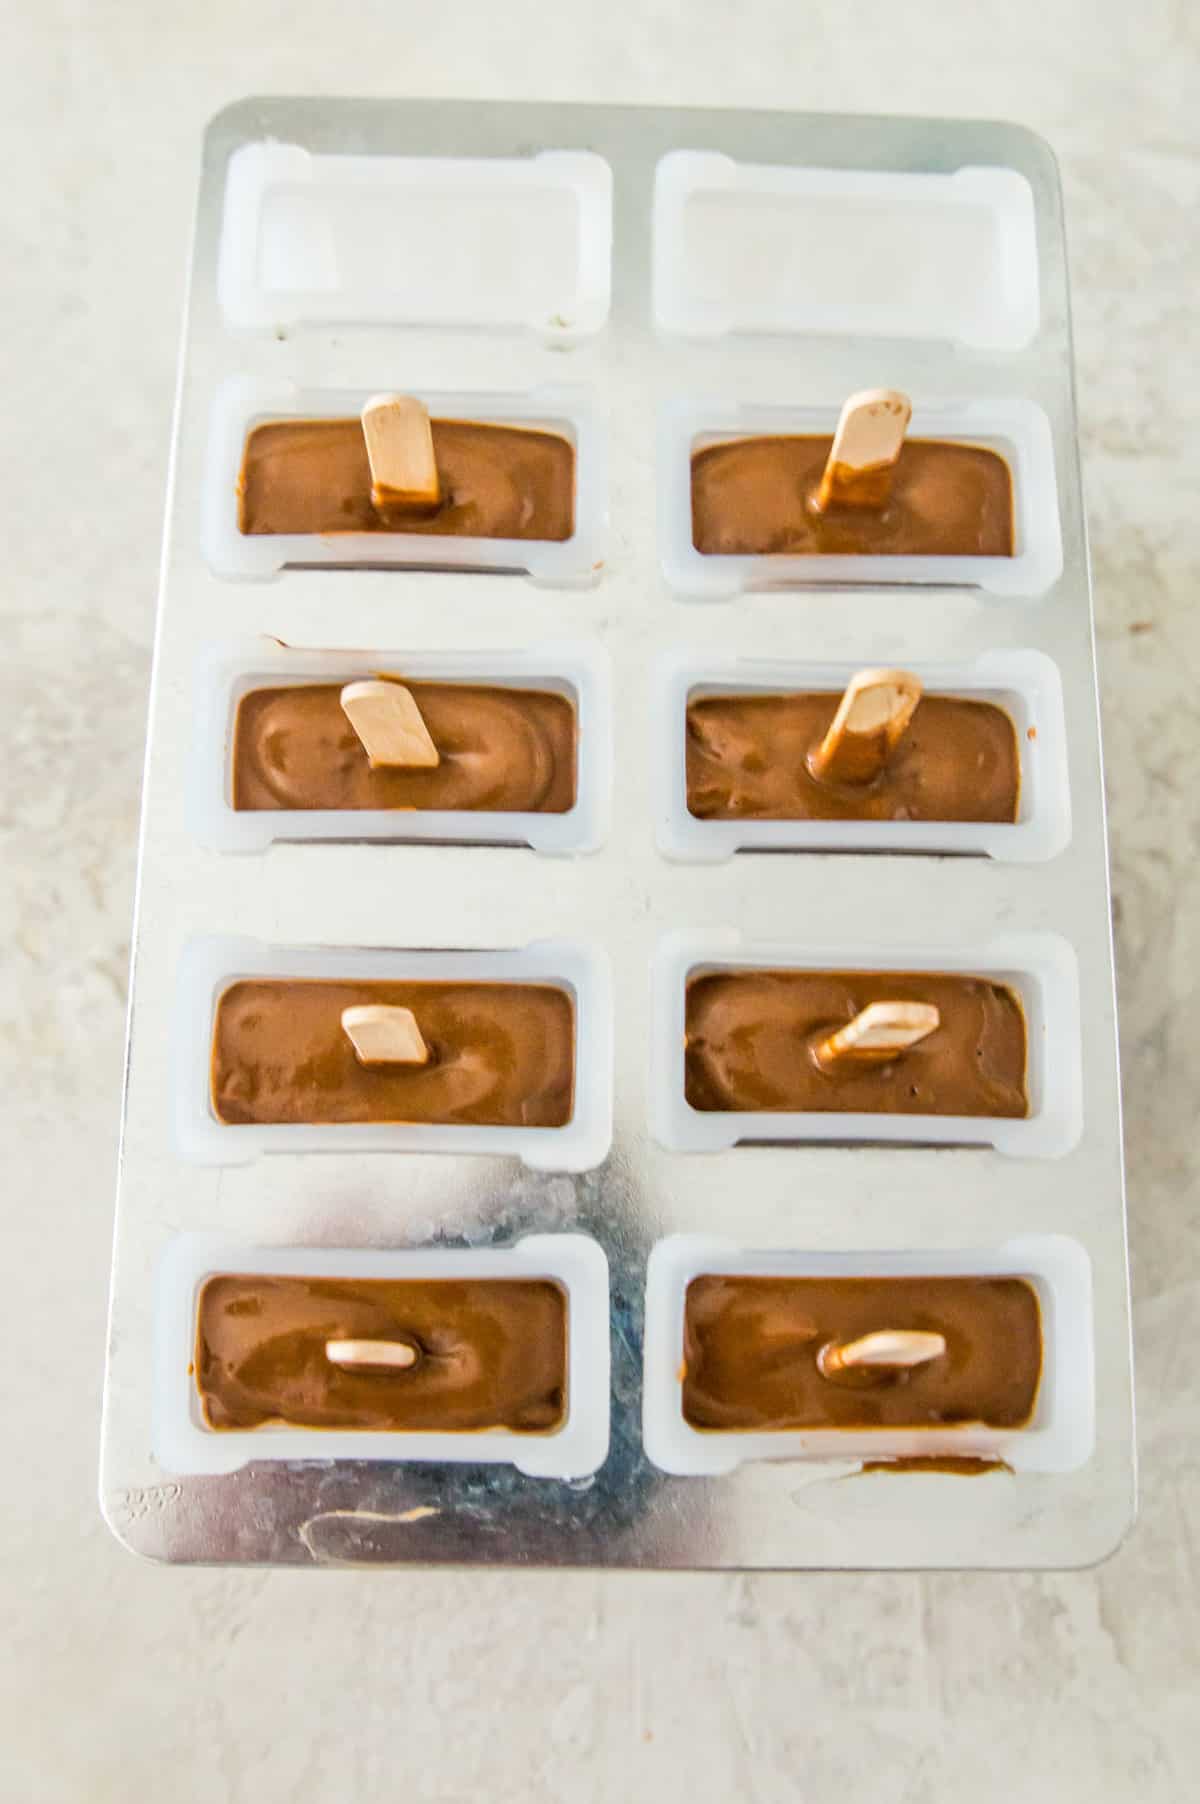 A popsicle mold filled with chocolate popsicles.